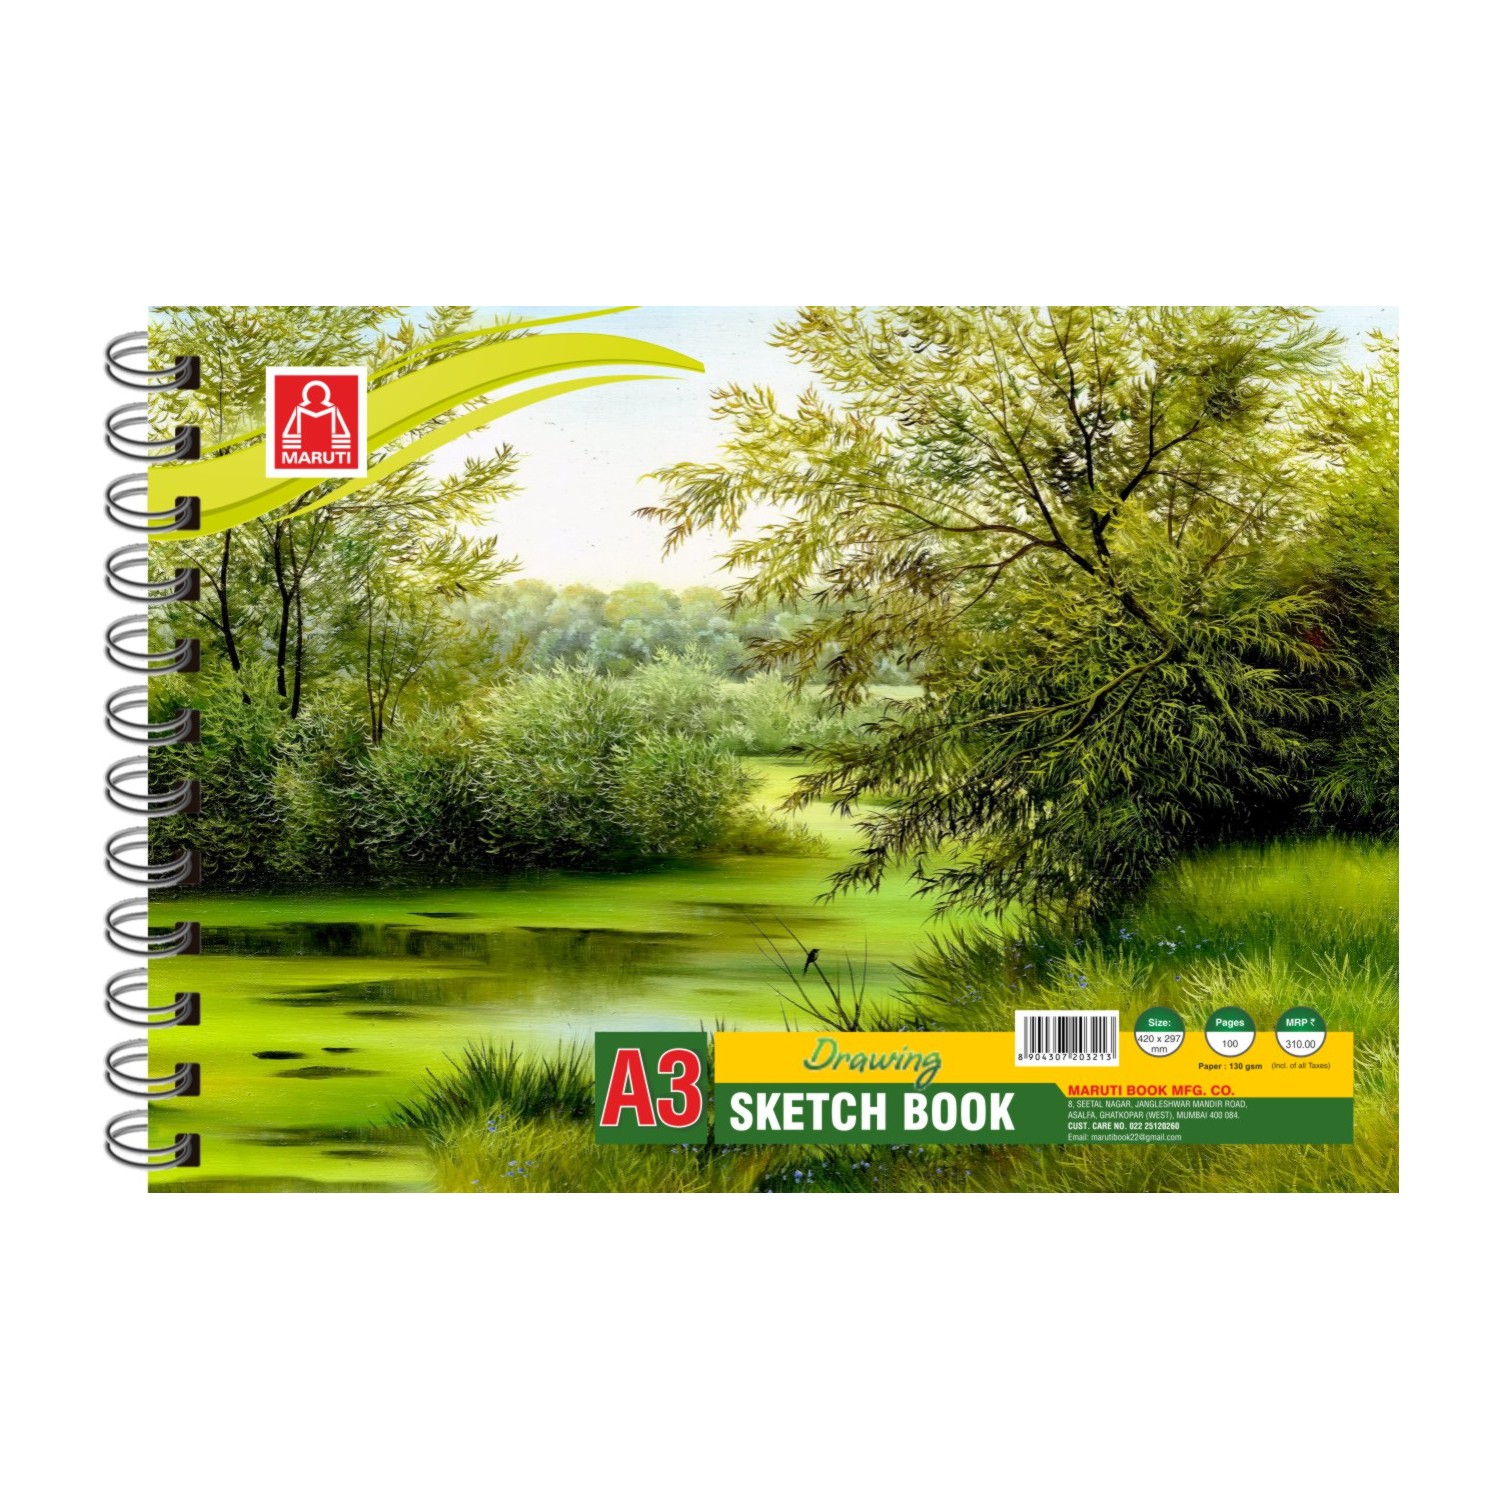 Buy Classmate Sketching Book A3 40 Pages Online At Best Price of Rs 90 -  bigbasket